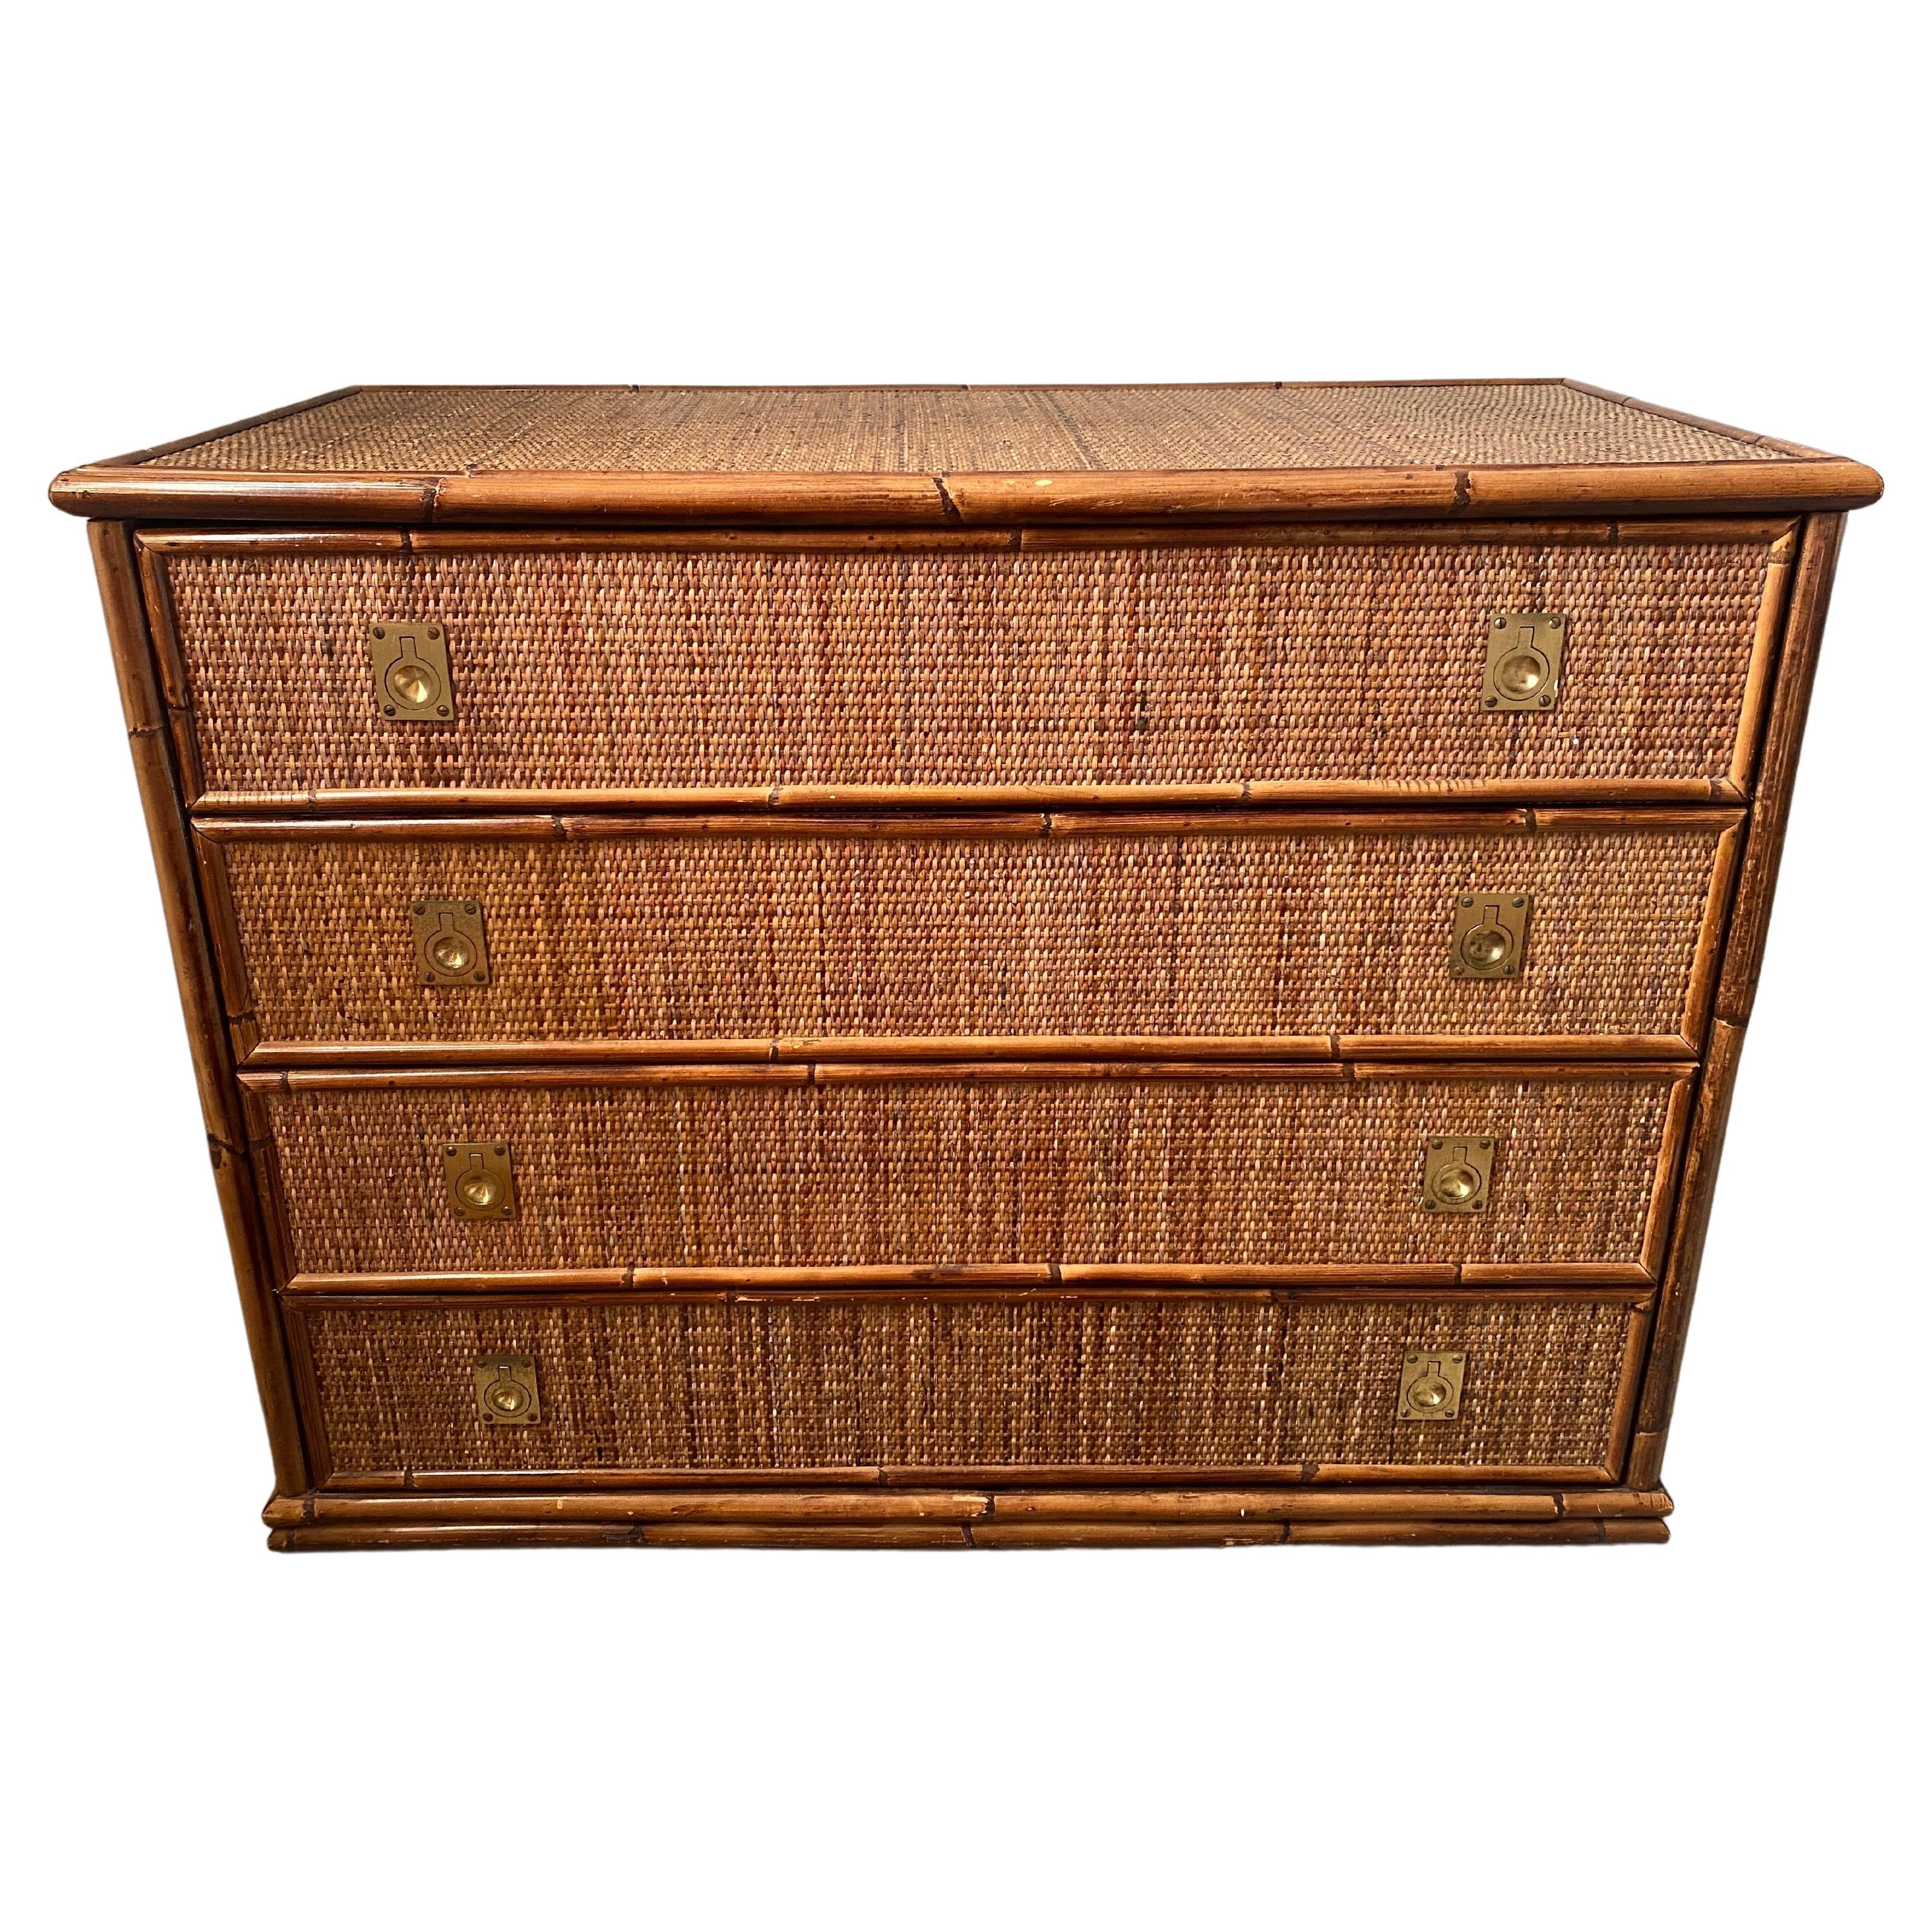 Dal Vera Chest of Drawers in Woven Rattan and Bamboo Italian Design 1970